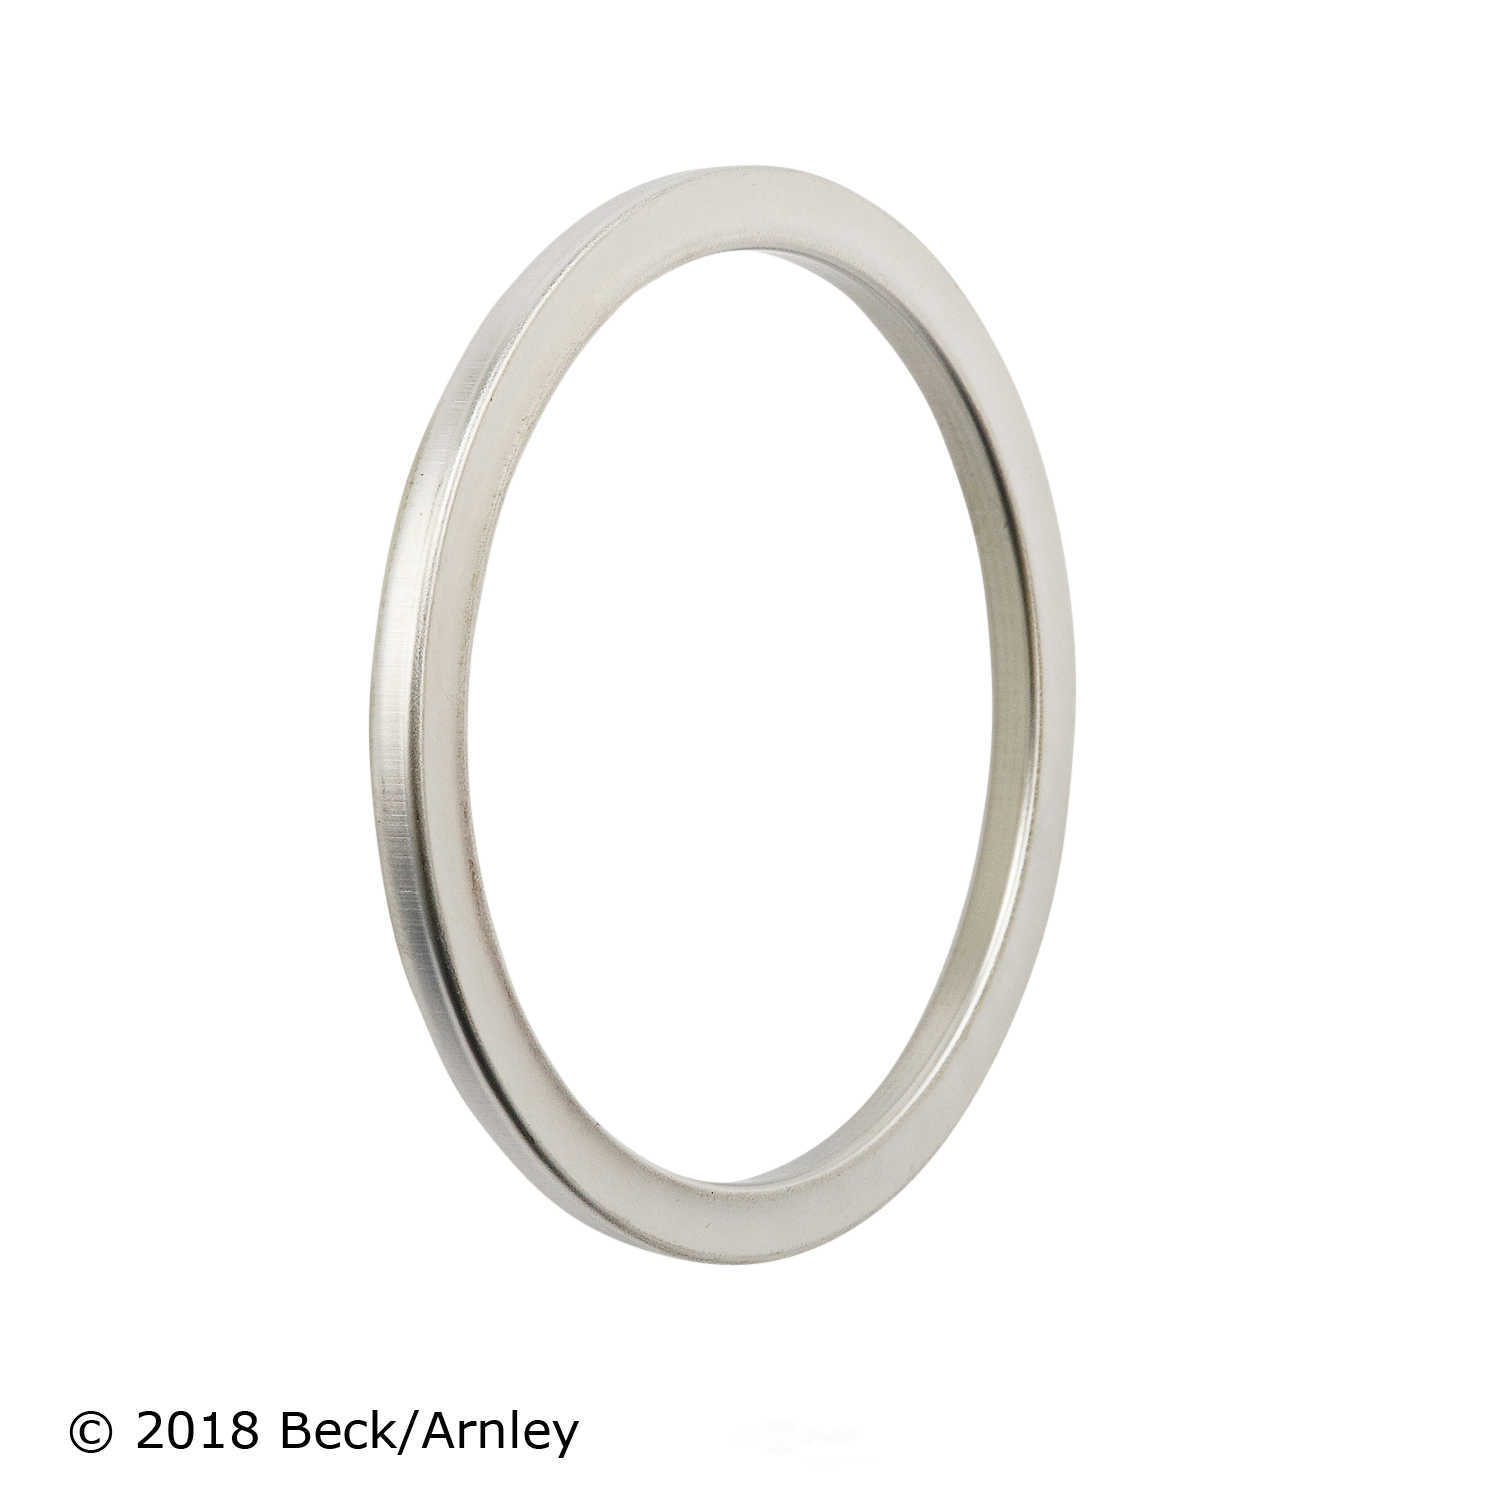 BECK/ARNLEY - Exhaust Pipe To Manifold Gasket - BAR 039-6134